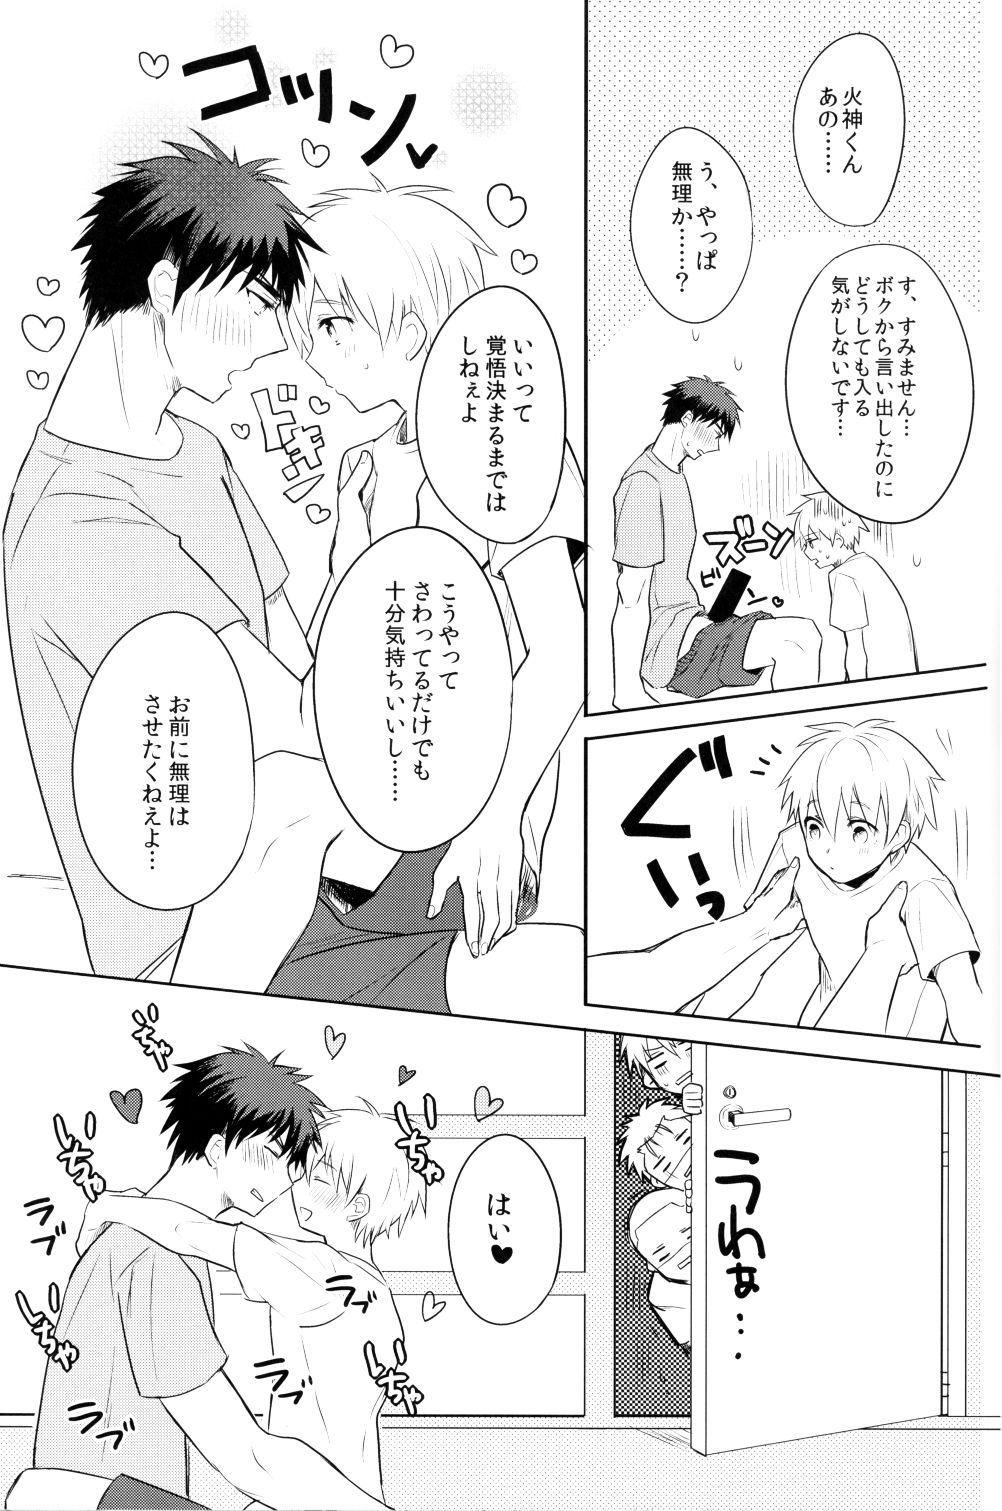 Kagami-kun's Thing is Amazing!! 7